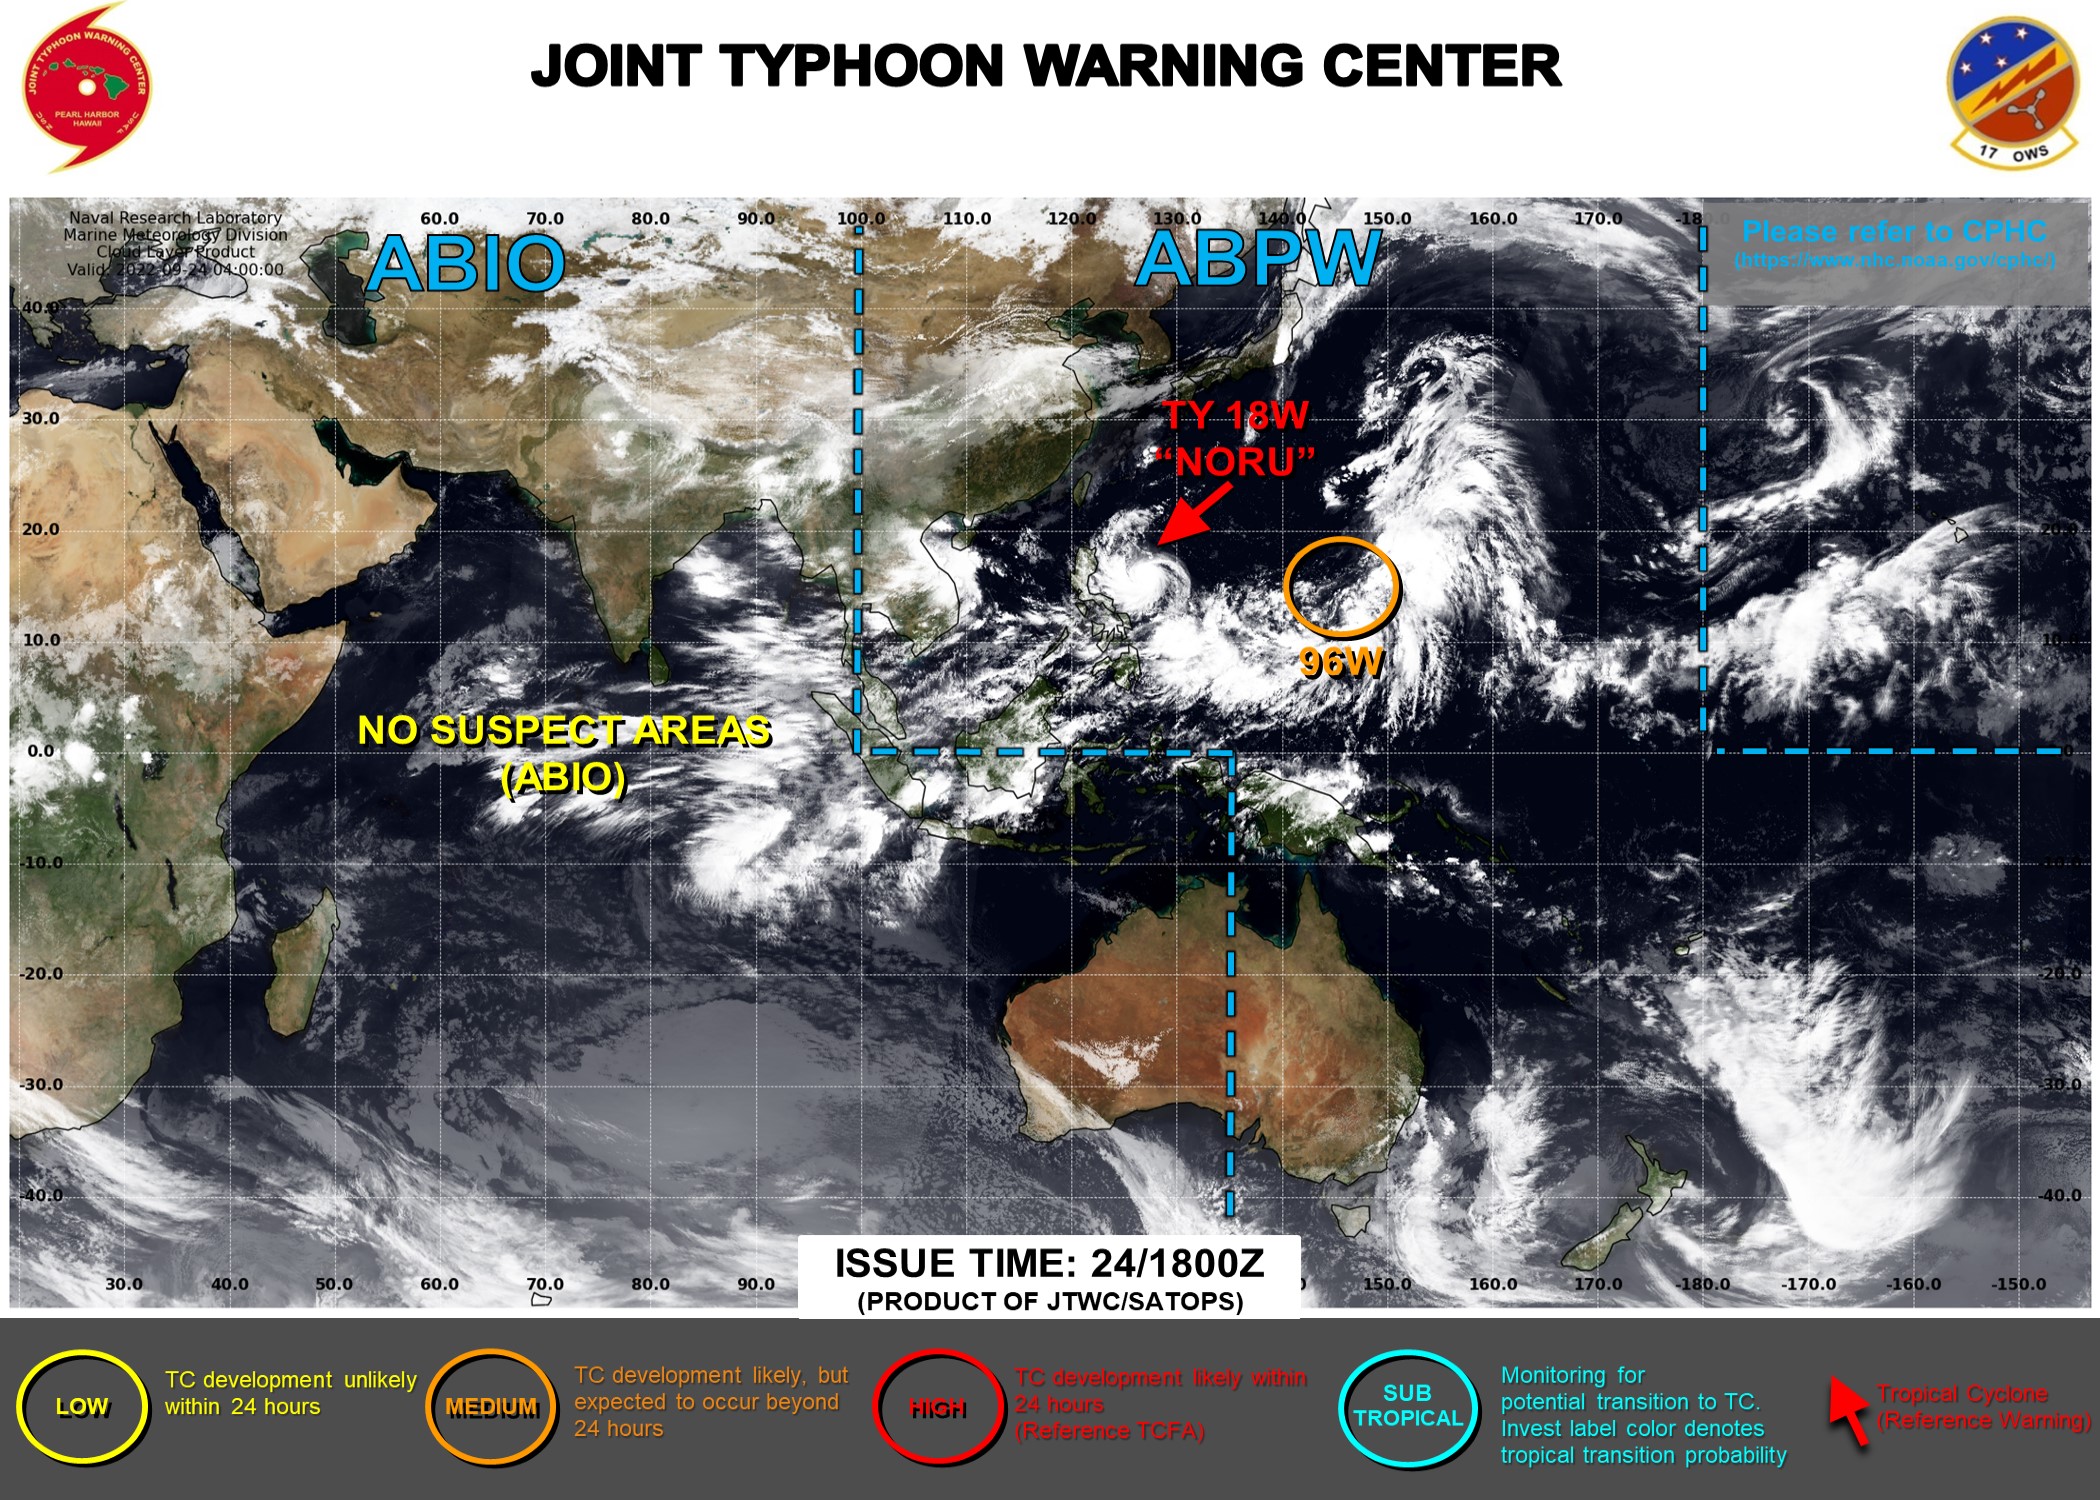 JTWC IS ISSUING 6HOURLY WARNINGS AND 3HOURLY SATELLITE BULLETINS ON 18W(NORU).